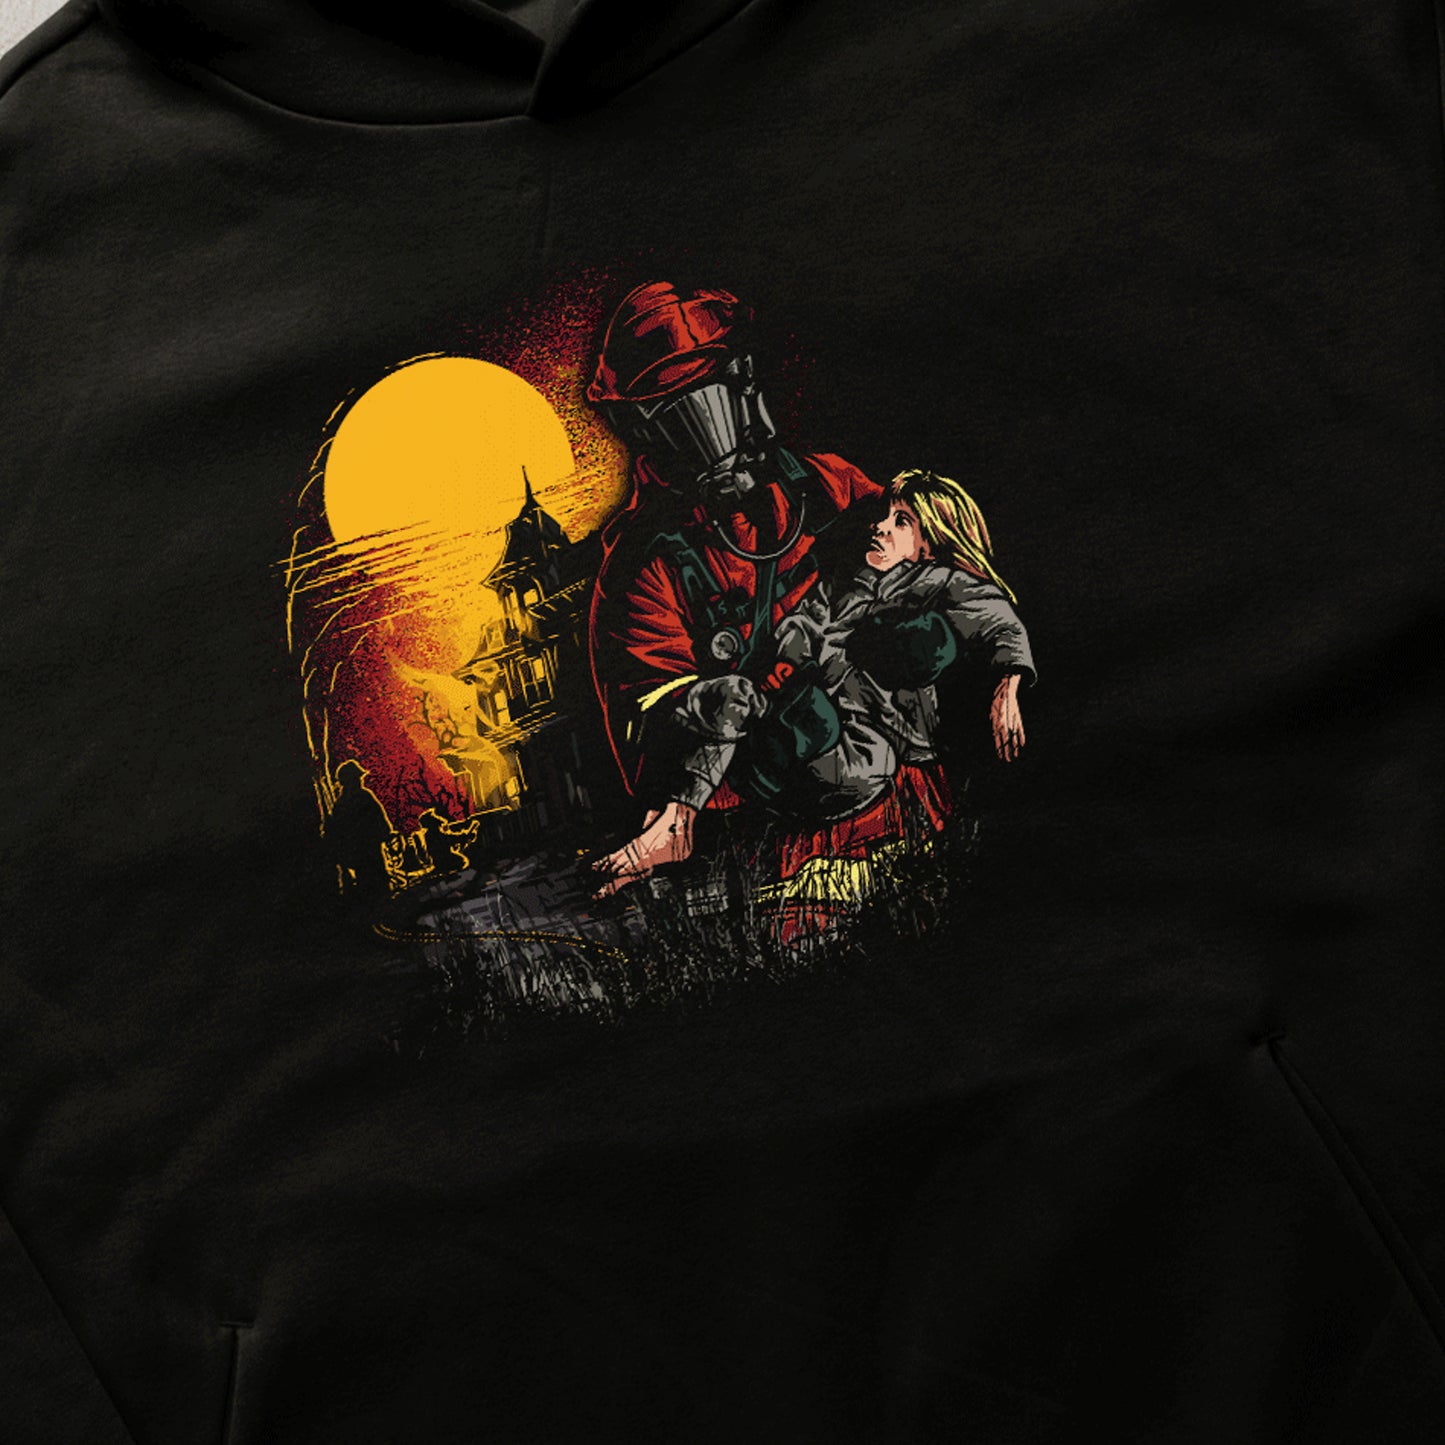 Fire Fighters Hoodie Oversize